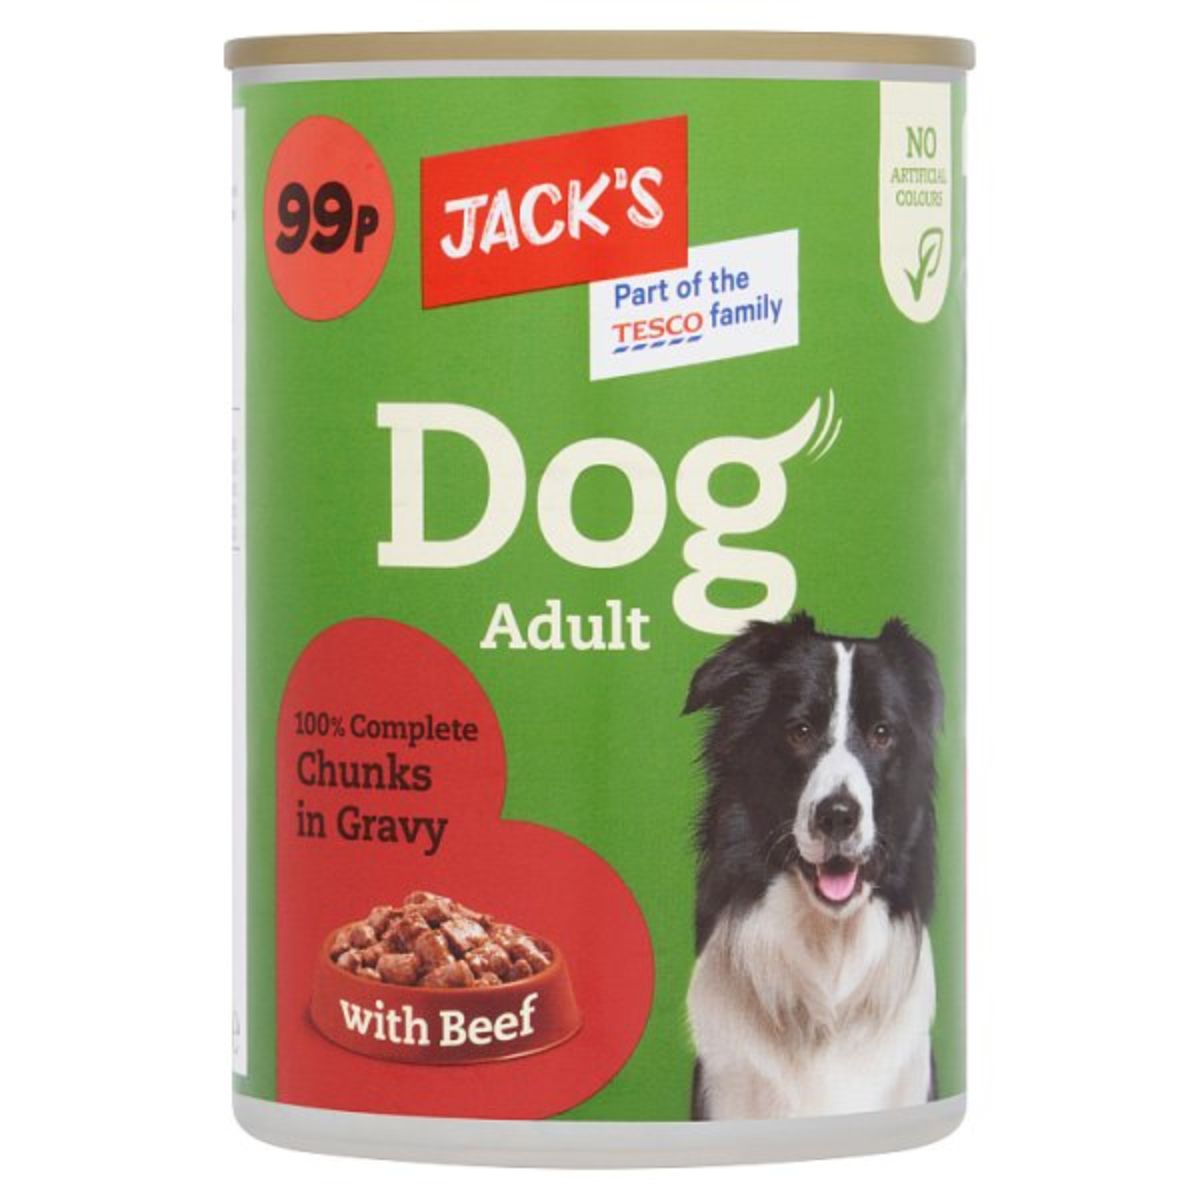 Jack's - Dog Adult Chunks in Gravy with Beef - 400g adult wet food.